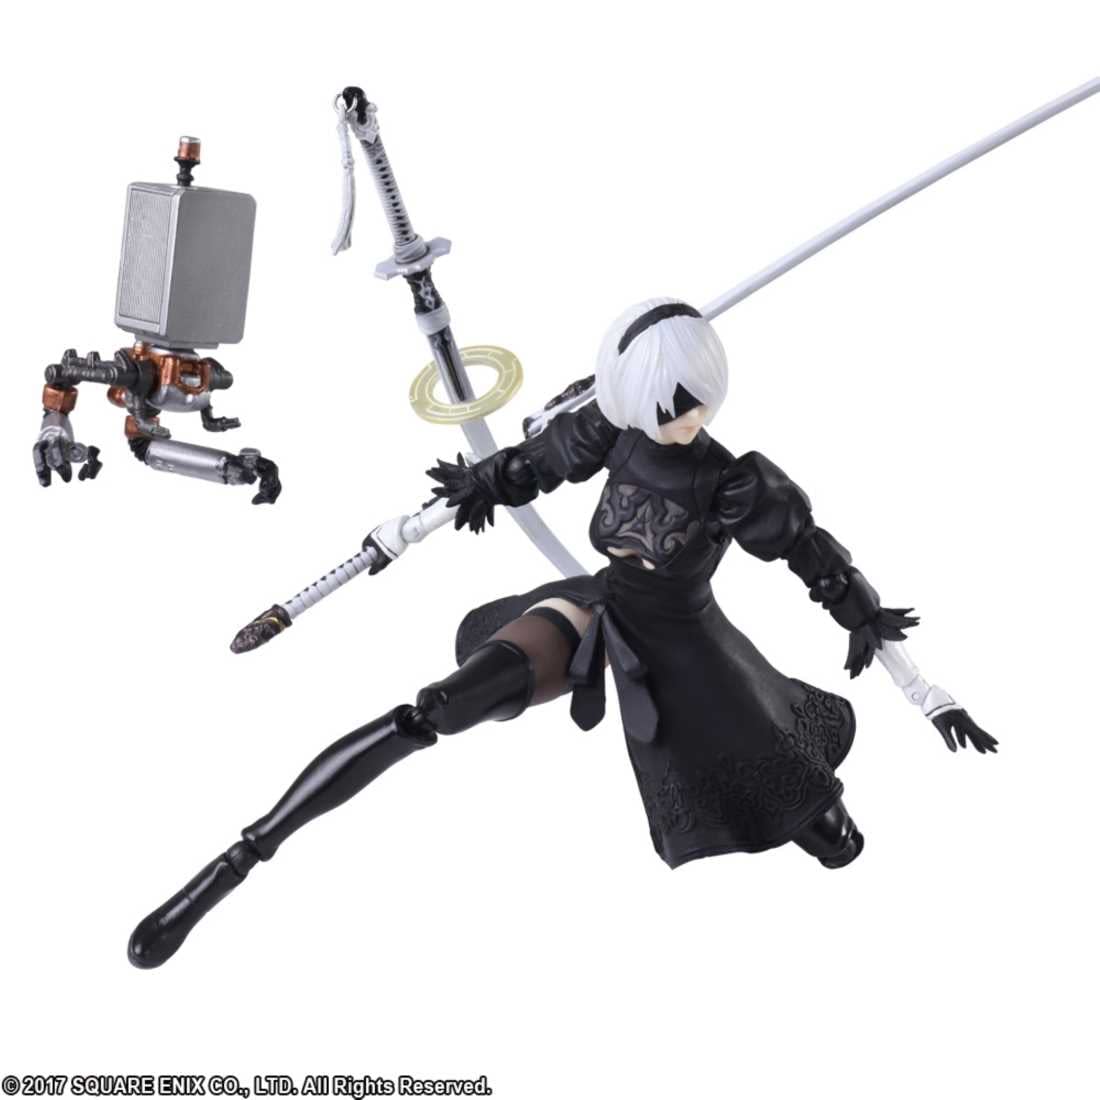 Nier Automata YoRHa 2B Gets Her Own Figure from Bring Arts